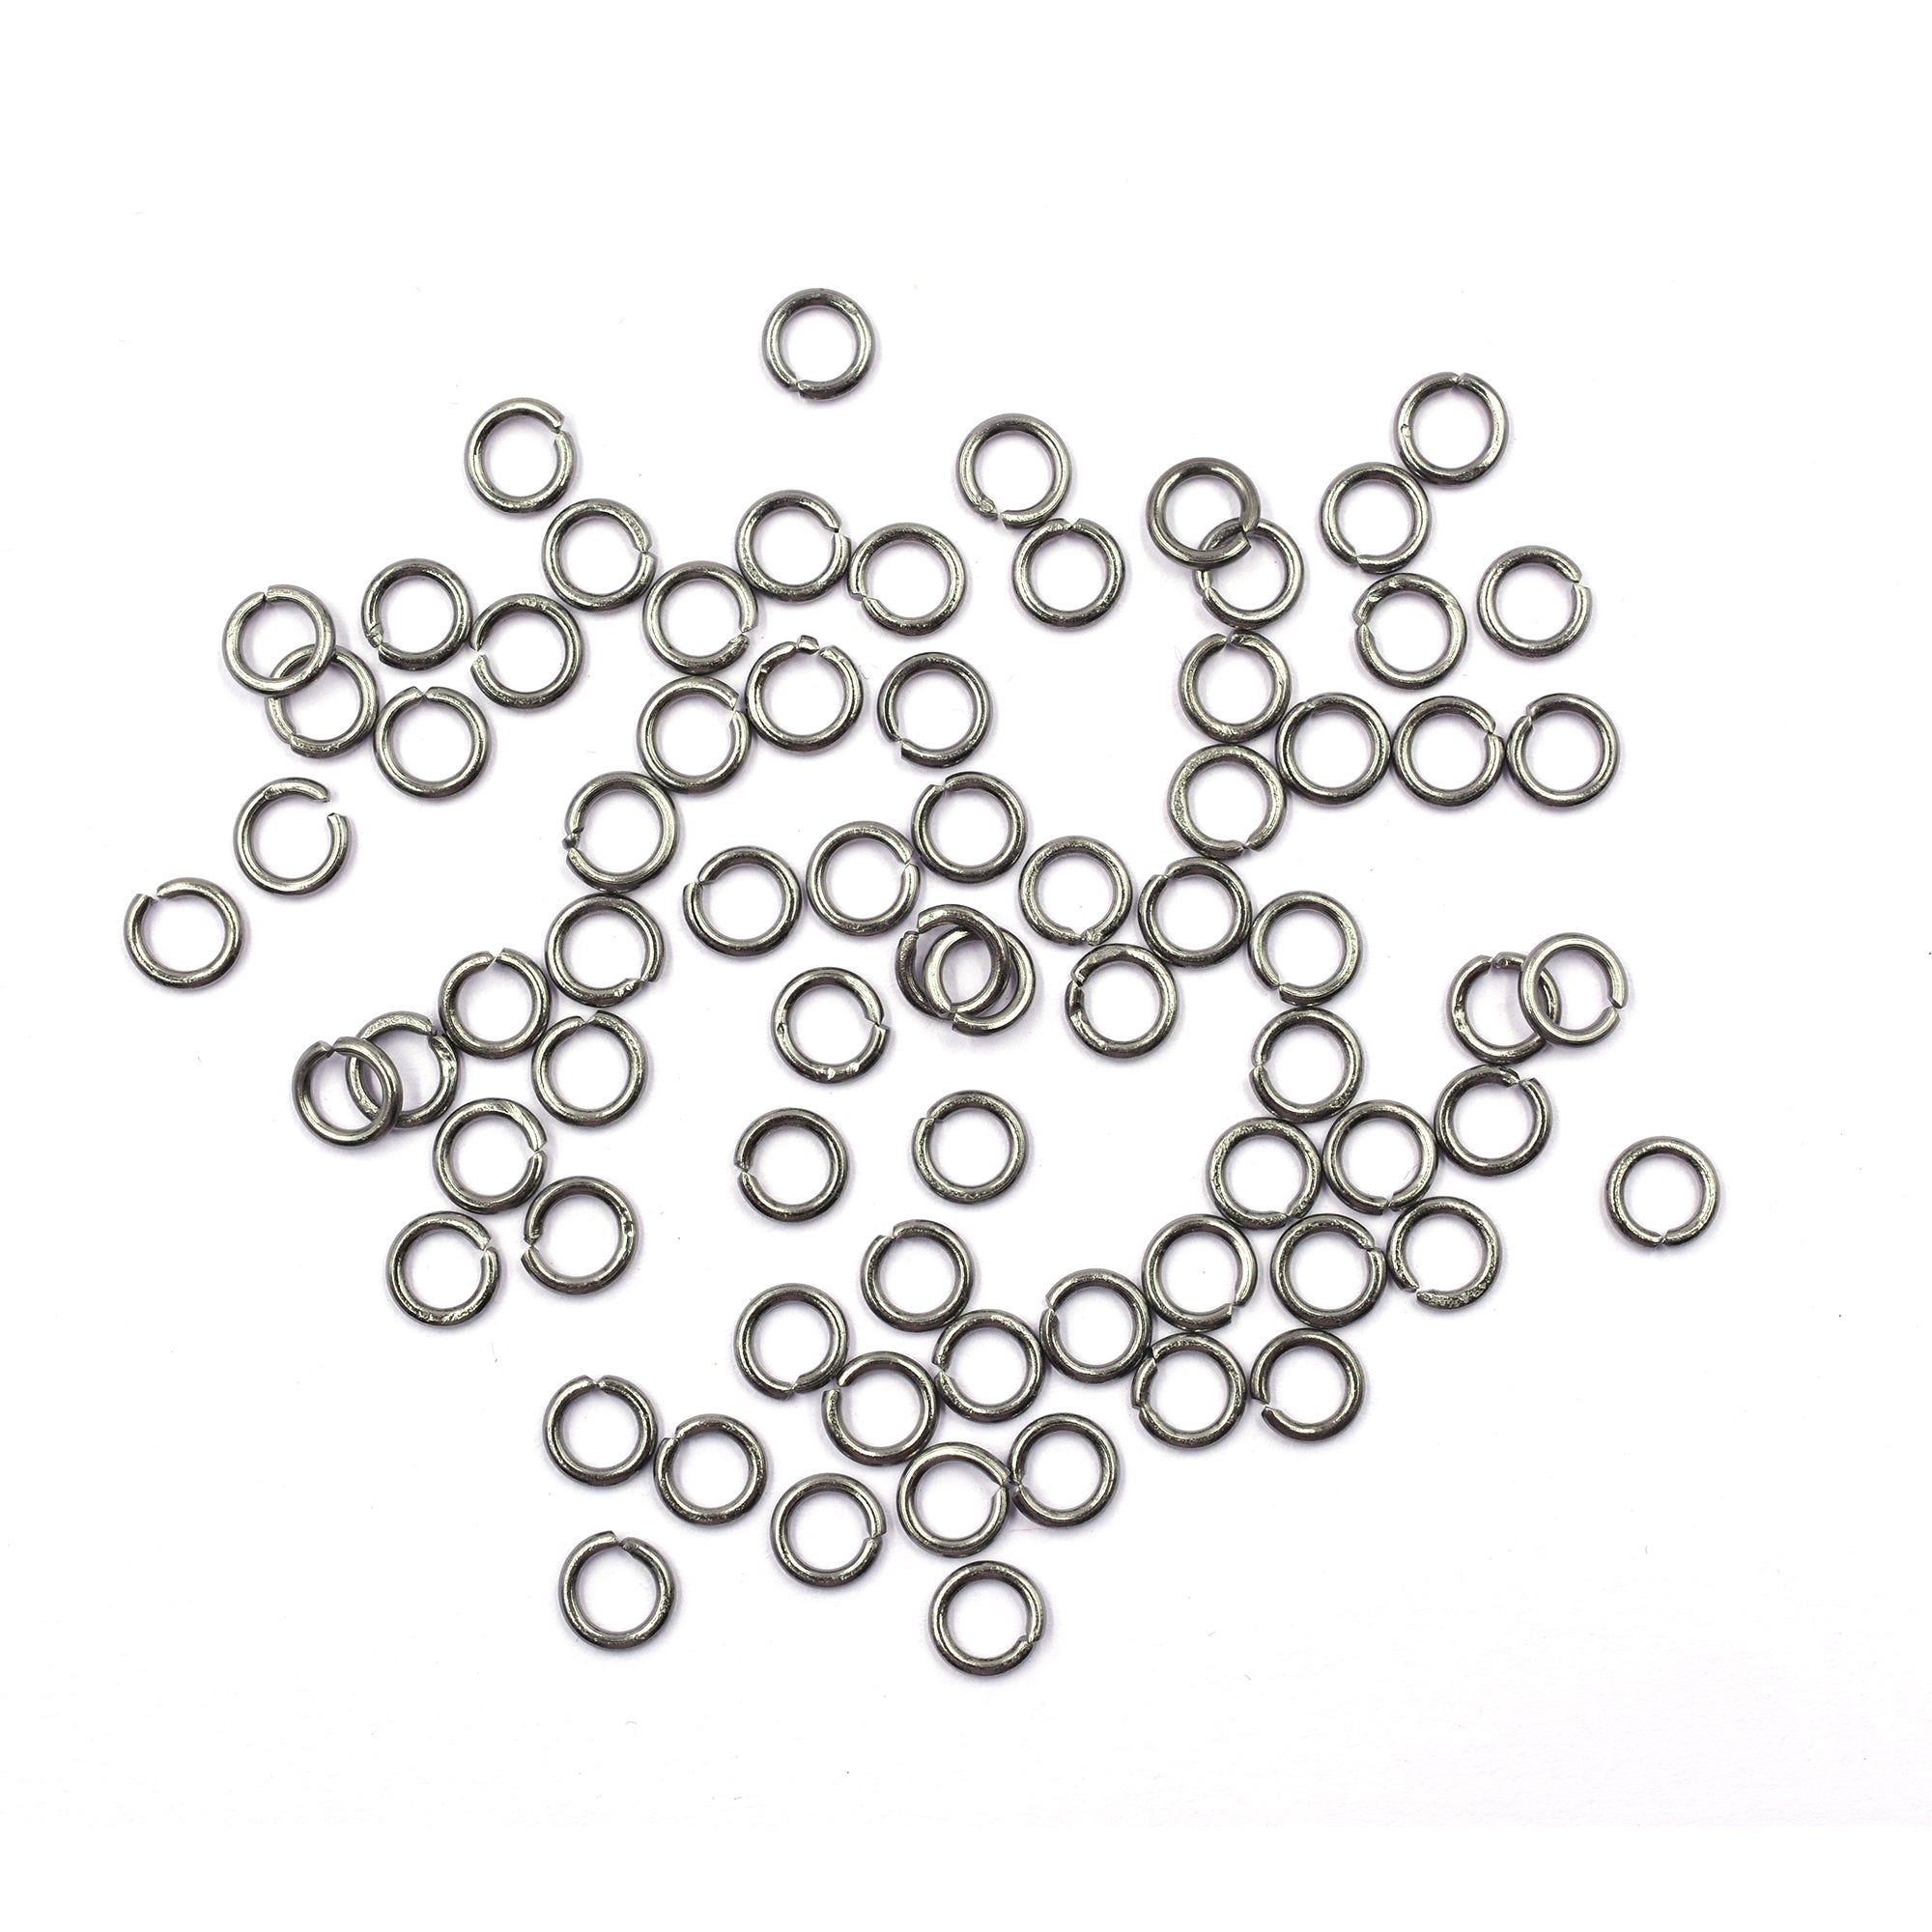 500 Pcs 6mm Open Jump Ring Black Finished Copper